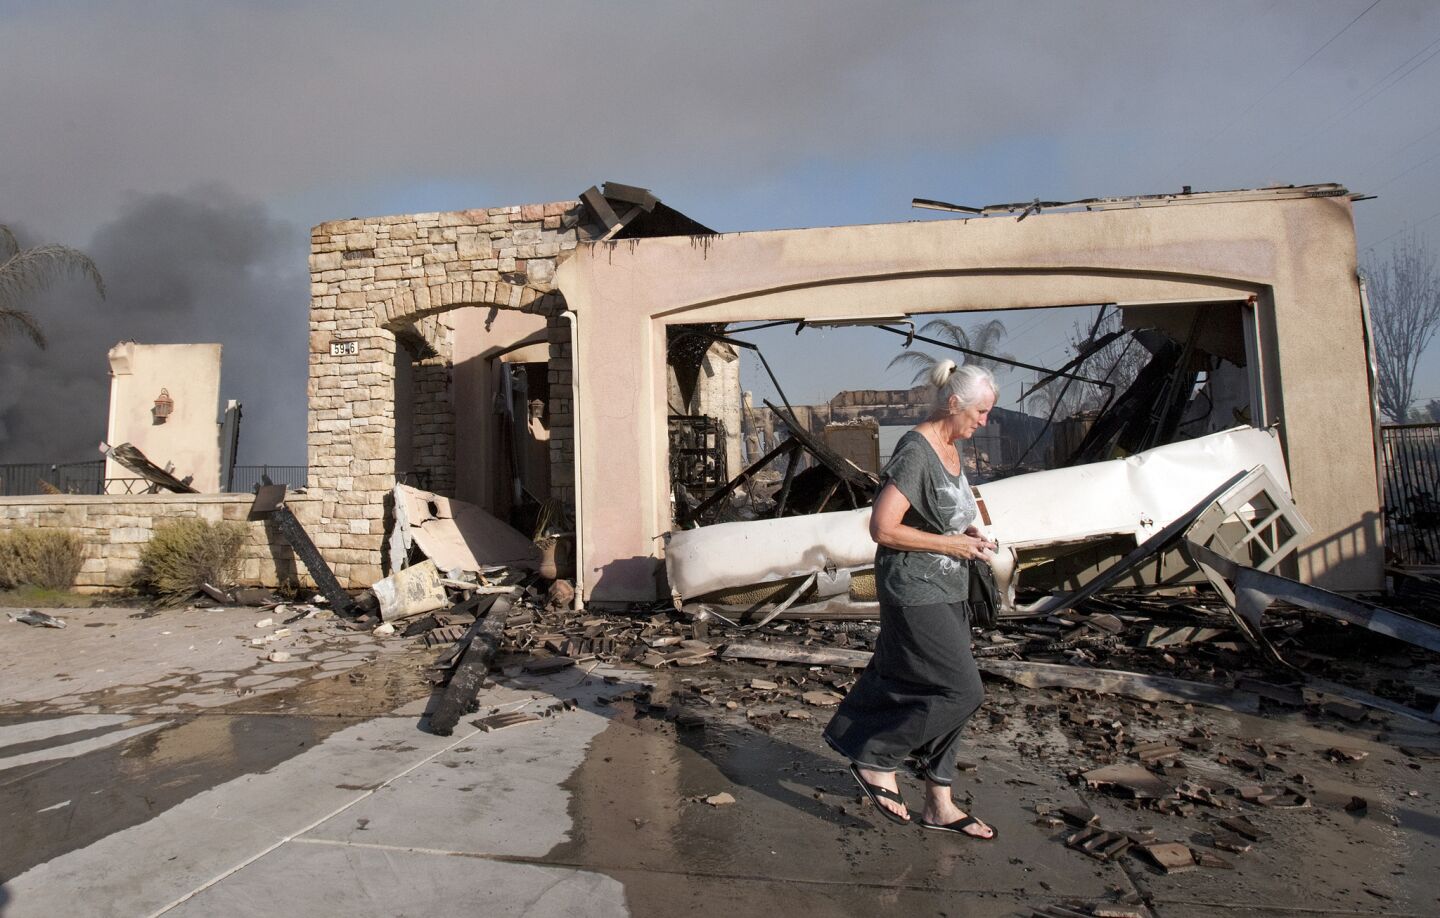 Sophie Payne walks past what is left of her home on Black Rail Road after it was destroyed in the Poinsettia wildfire on May 14, 2014 in Carlsbad, Calif.